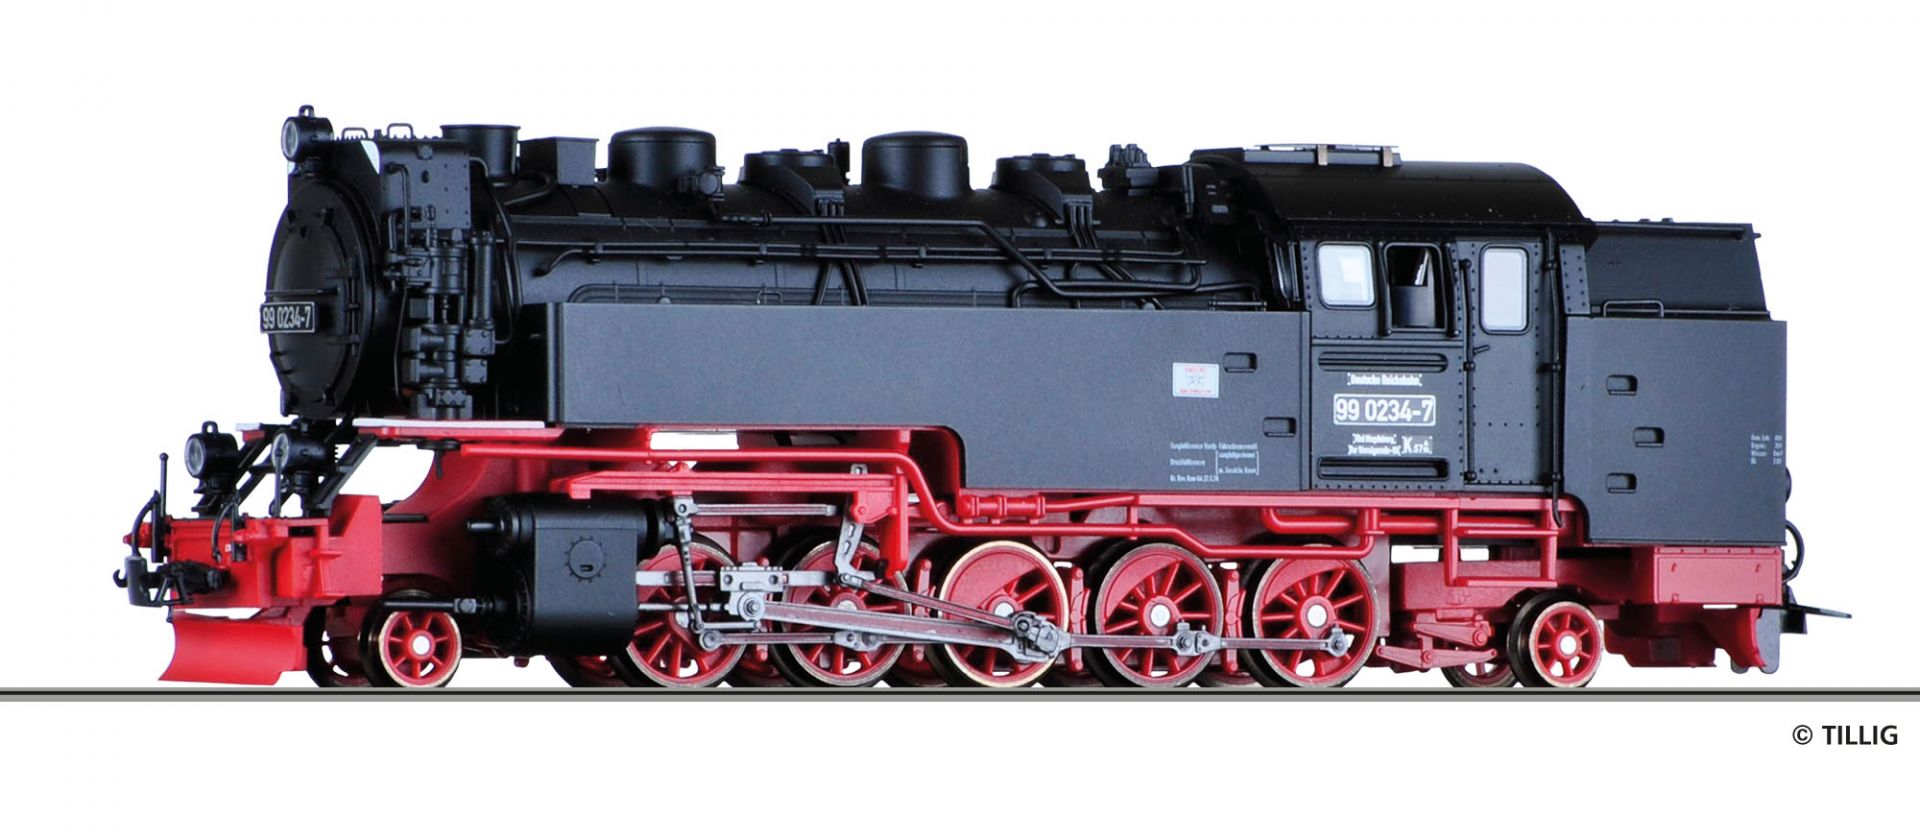 02929 | Steam locomotive DR -sold out-